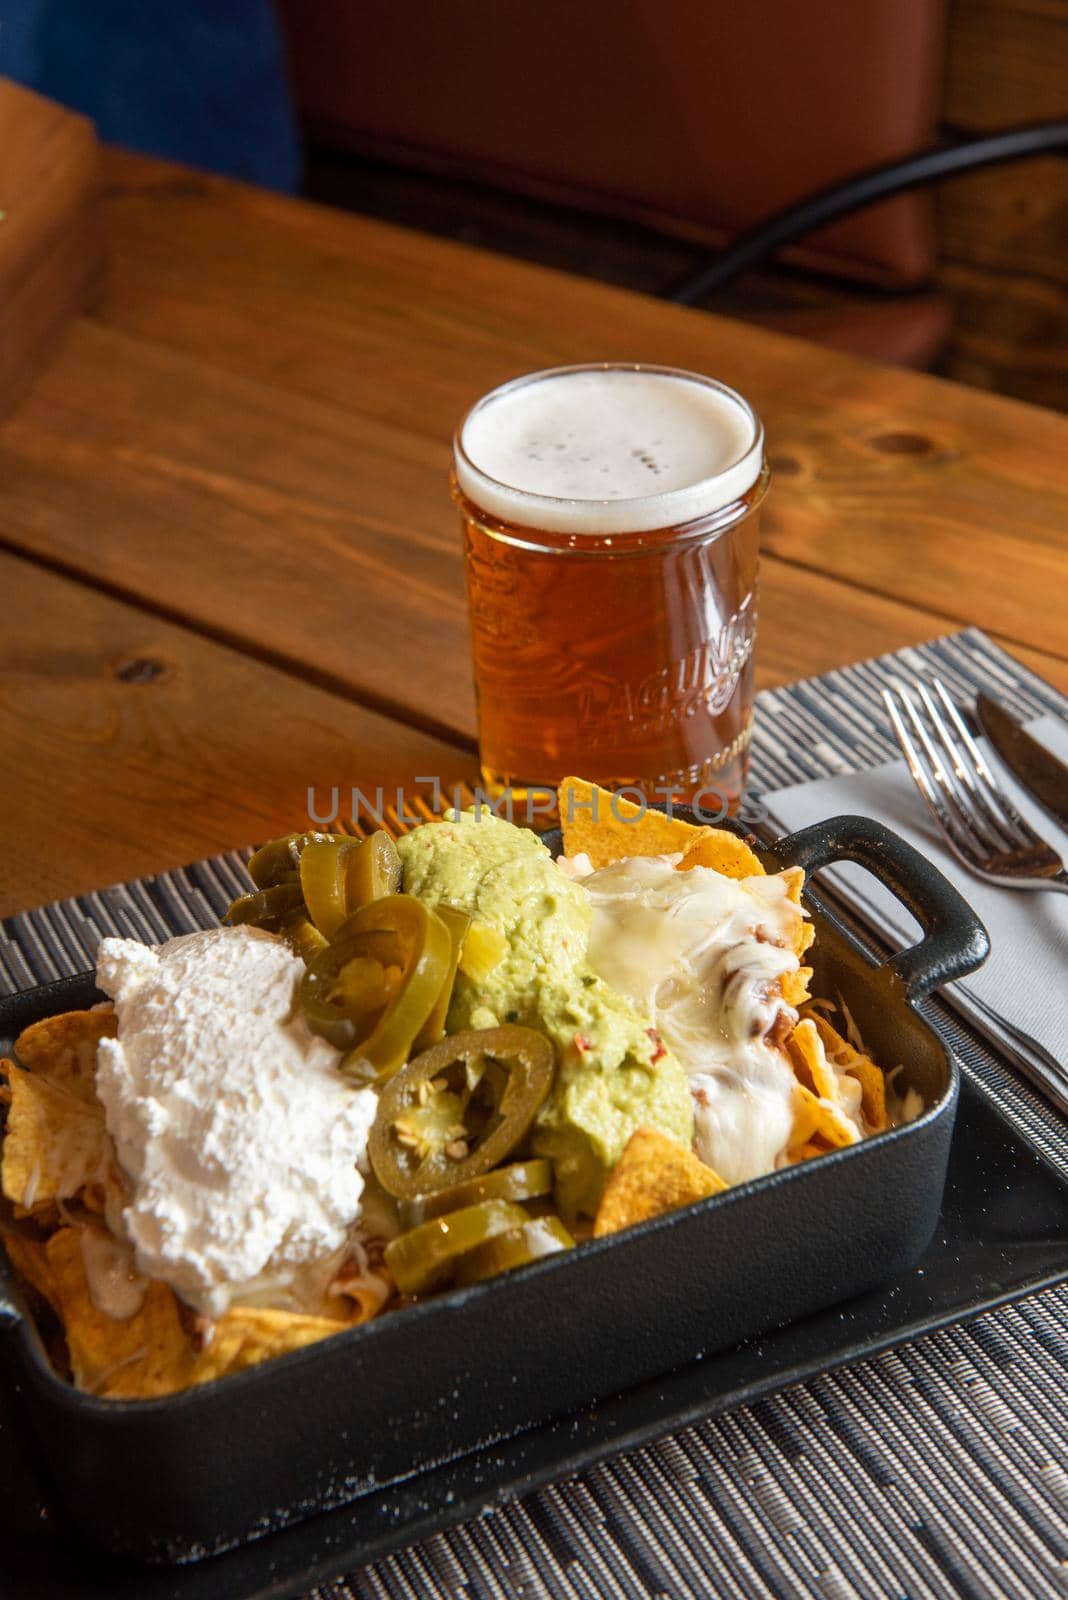 Nachos with glass of draft beer on wooden background.